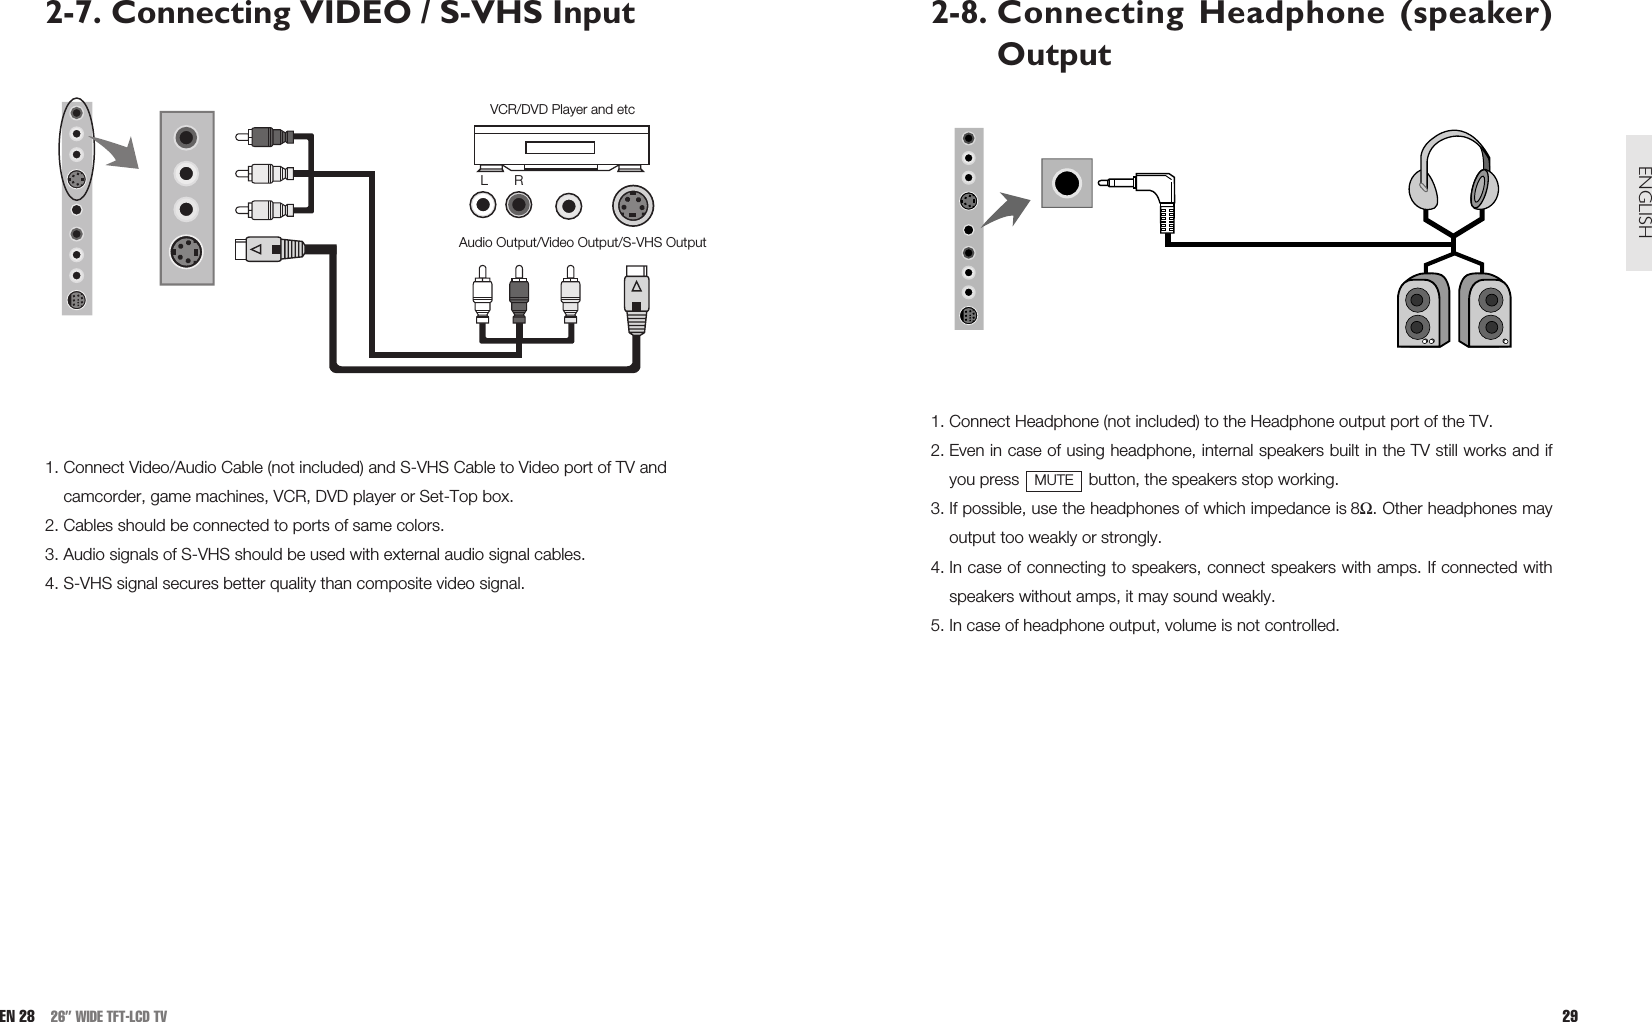 2-8. Connecting Headphone (speaker)Output1. Connect Headphone (not included) to the Headphone output port of the TV.2. Even in case of using headphone, internal speakers built in the TV still works and ifyou press  button, the speakers stop working. 3. If possible, use the headphones of which impedance is 8Ω. Other headphones mayoutput too weakly or strongly.4. In case of connecting to speakers, connect speakers with amps. If connected withspeakers without amps, it may sound weakly. 5. In case of headphone output, volume is not controlled.MUTE29ENGLISH2-7. Connecting VIDEO / S-VHS Input1. Connect Video/Audio Cable (not included) and S-VHS Cable to Video port of TV andcamcorder, game machines, VCR, DVD player or Set-Top box. 2. Cables should be connected to ports of same colors.3. Audio signals of S-VHS should be used with external audio signal cables.4. S-VHS signal secures better quality than composite video signal.  EN 28 26” WIDE TFT-LCD TVAudio Output/Video Output/S-VHS OutputVCR/DVD Player and etcL       R